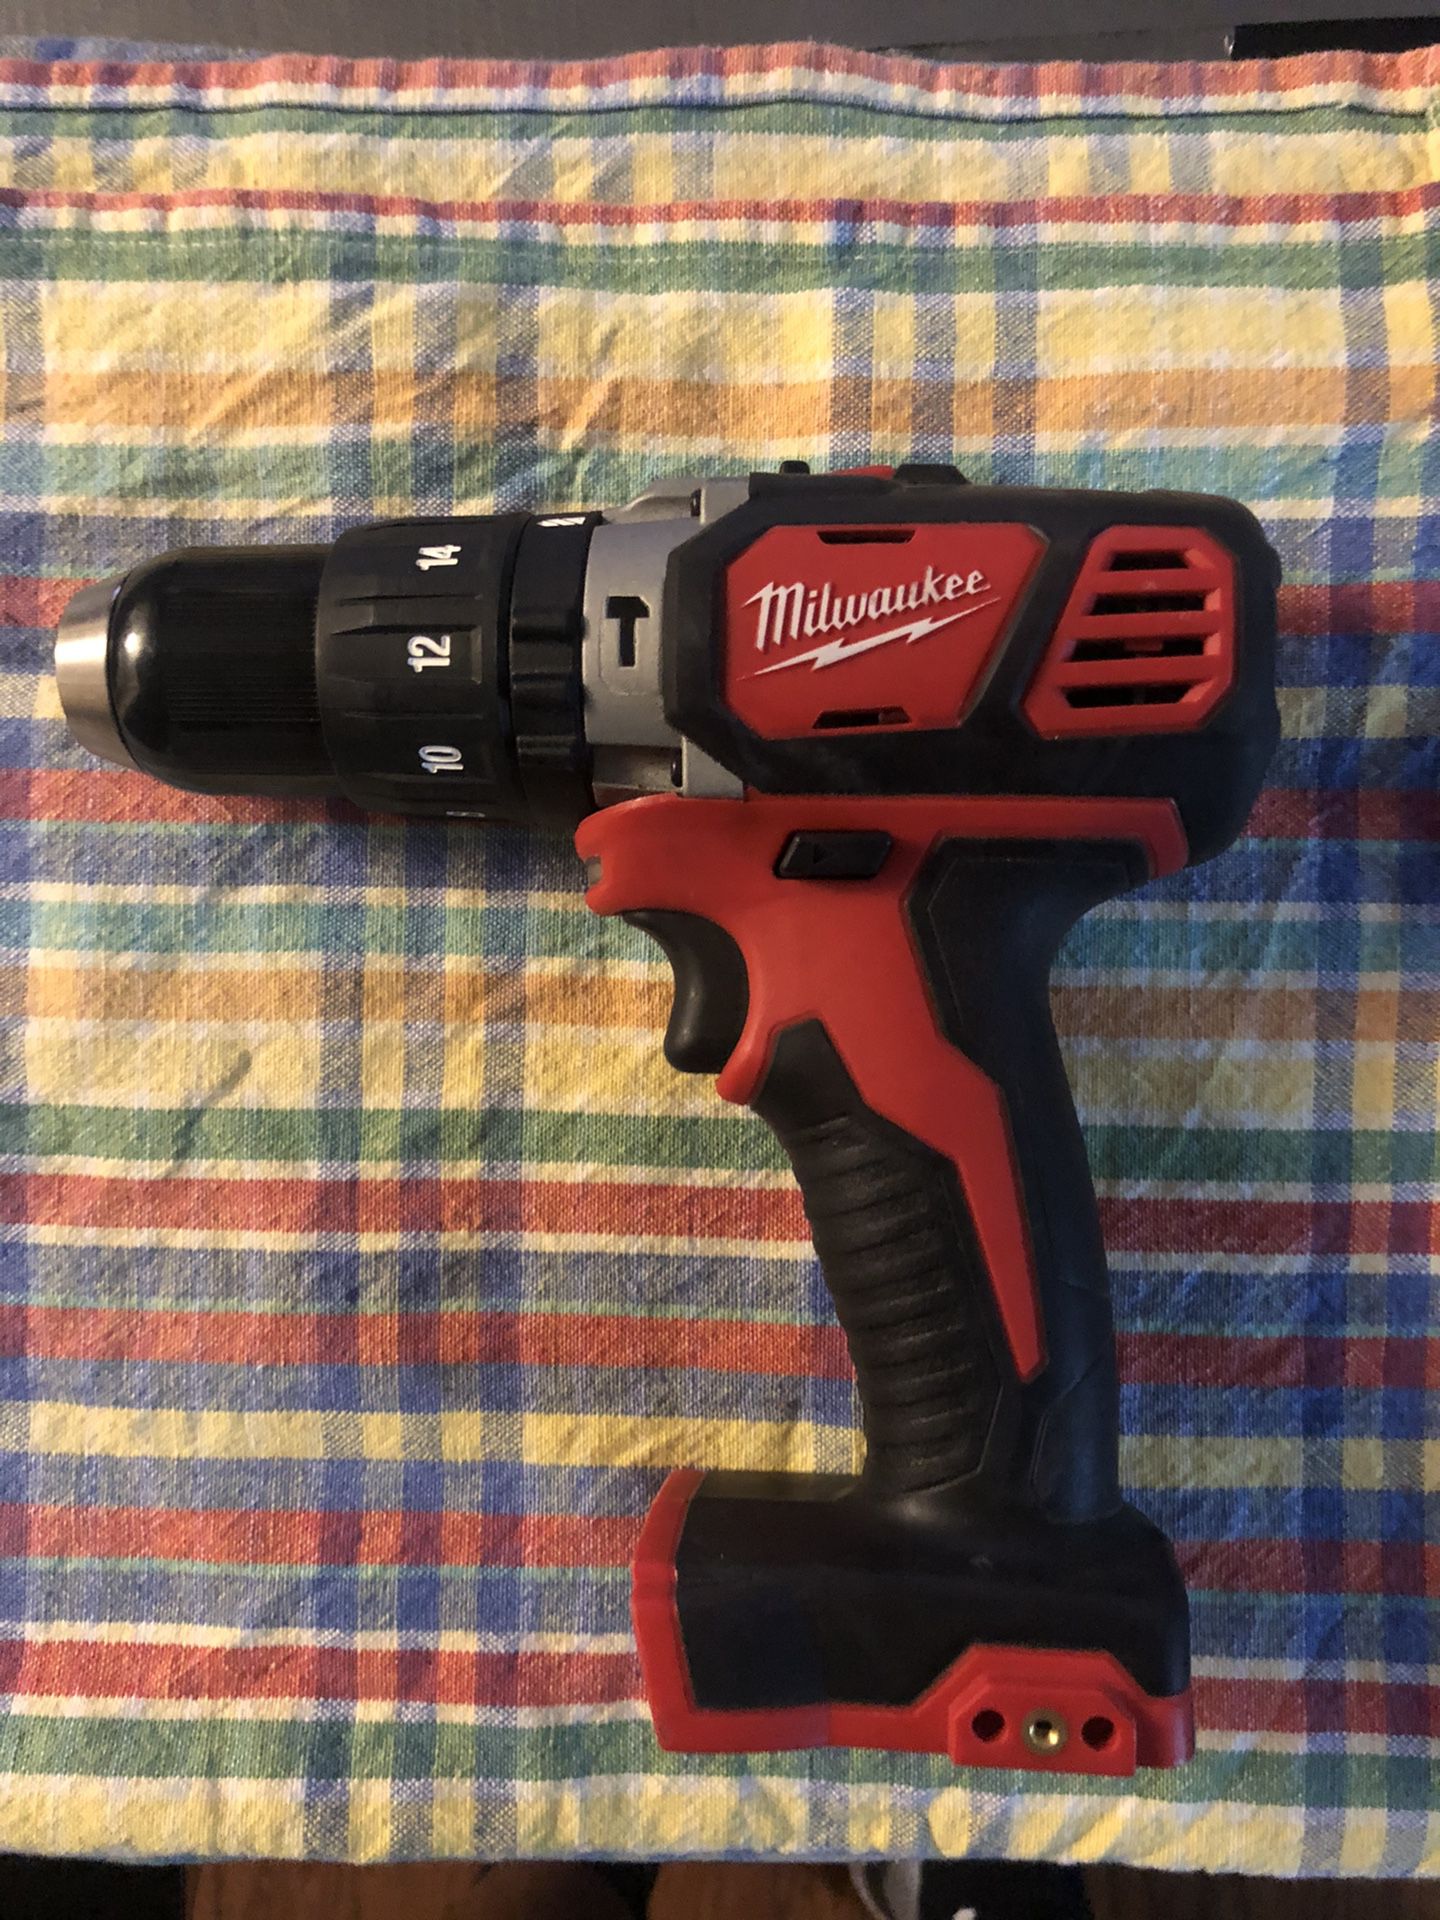 (2607-20) Milwaukee M18 Hammer Drill/Driver **TOOL ONLY, SOLO EL TALADRO**